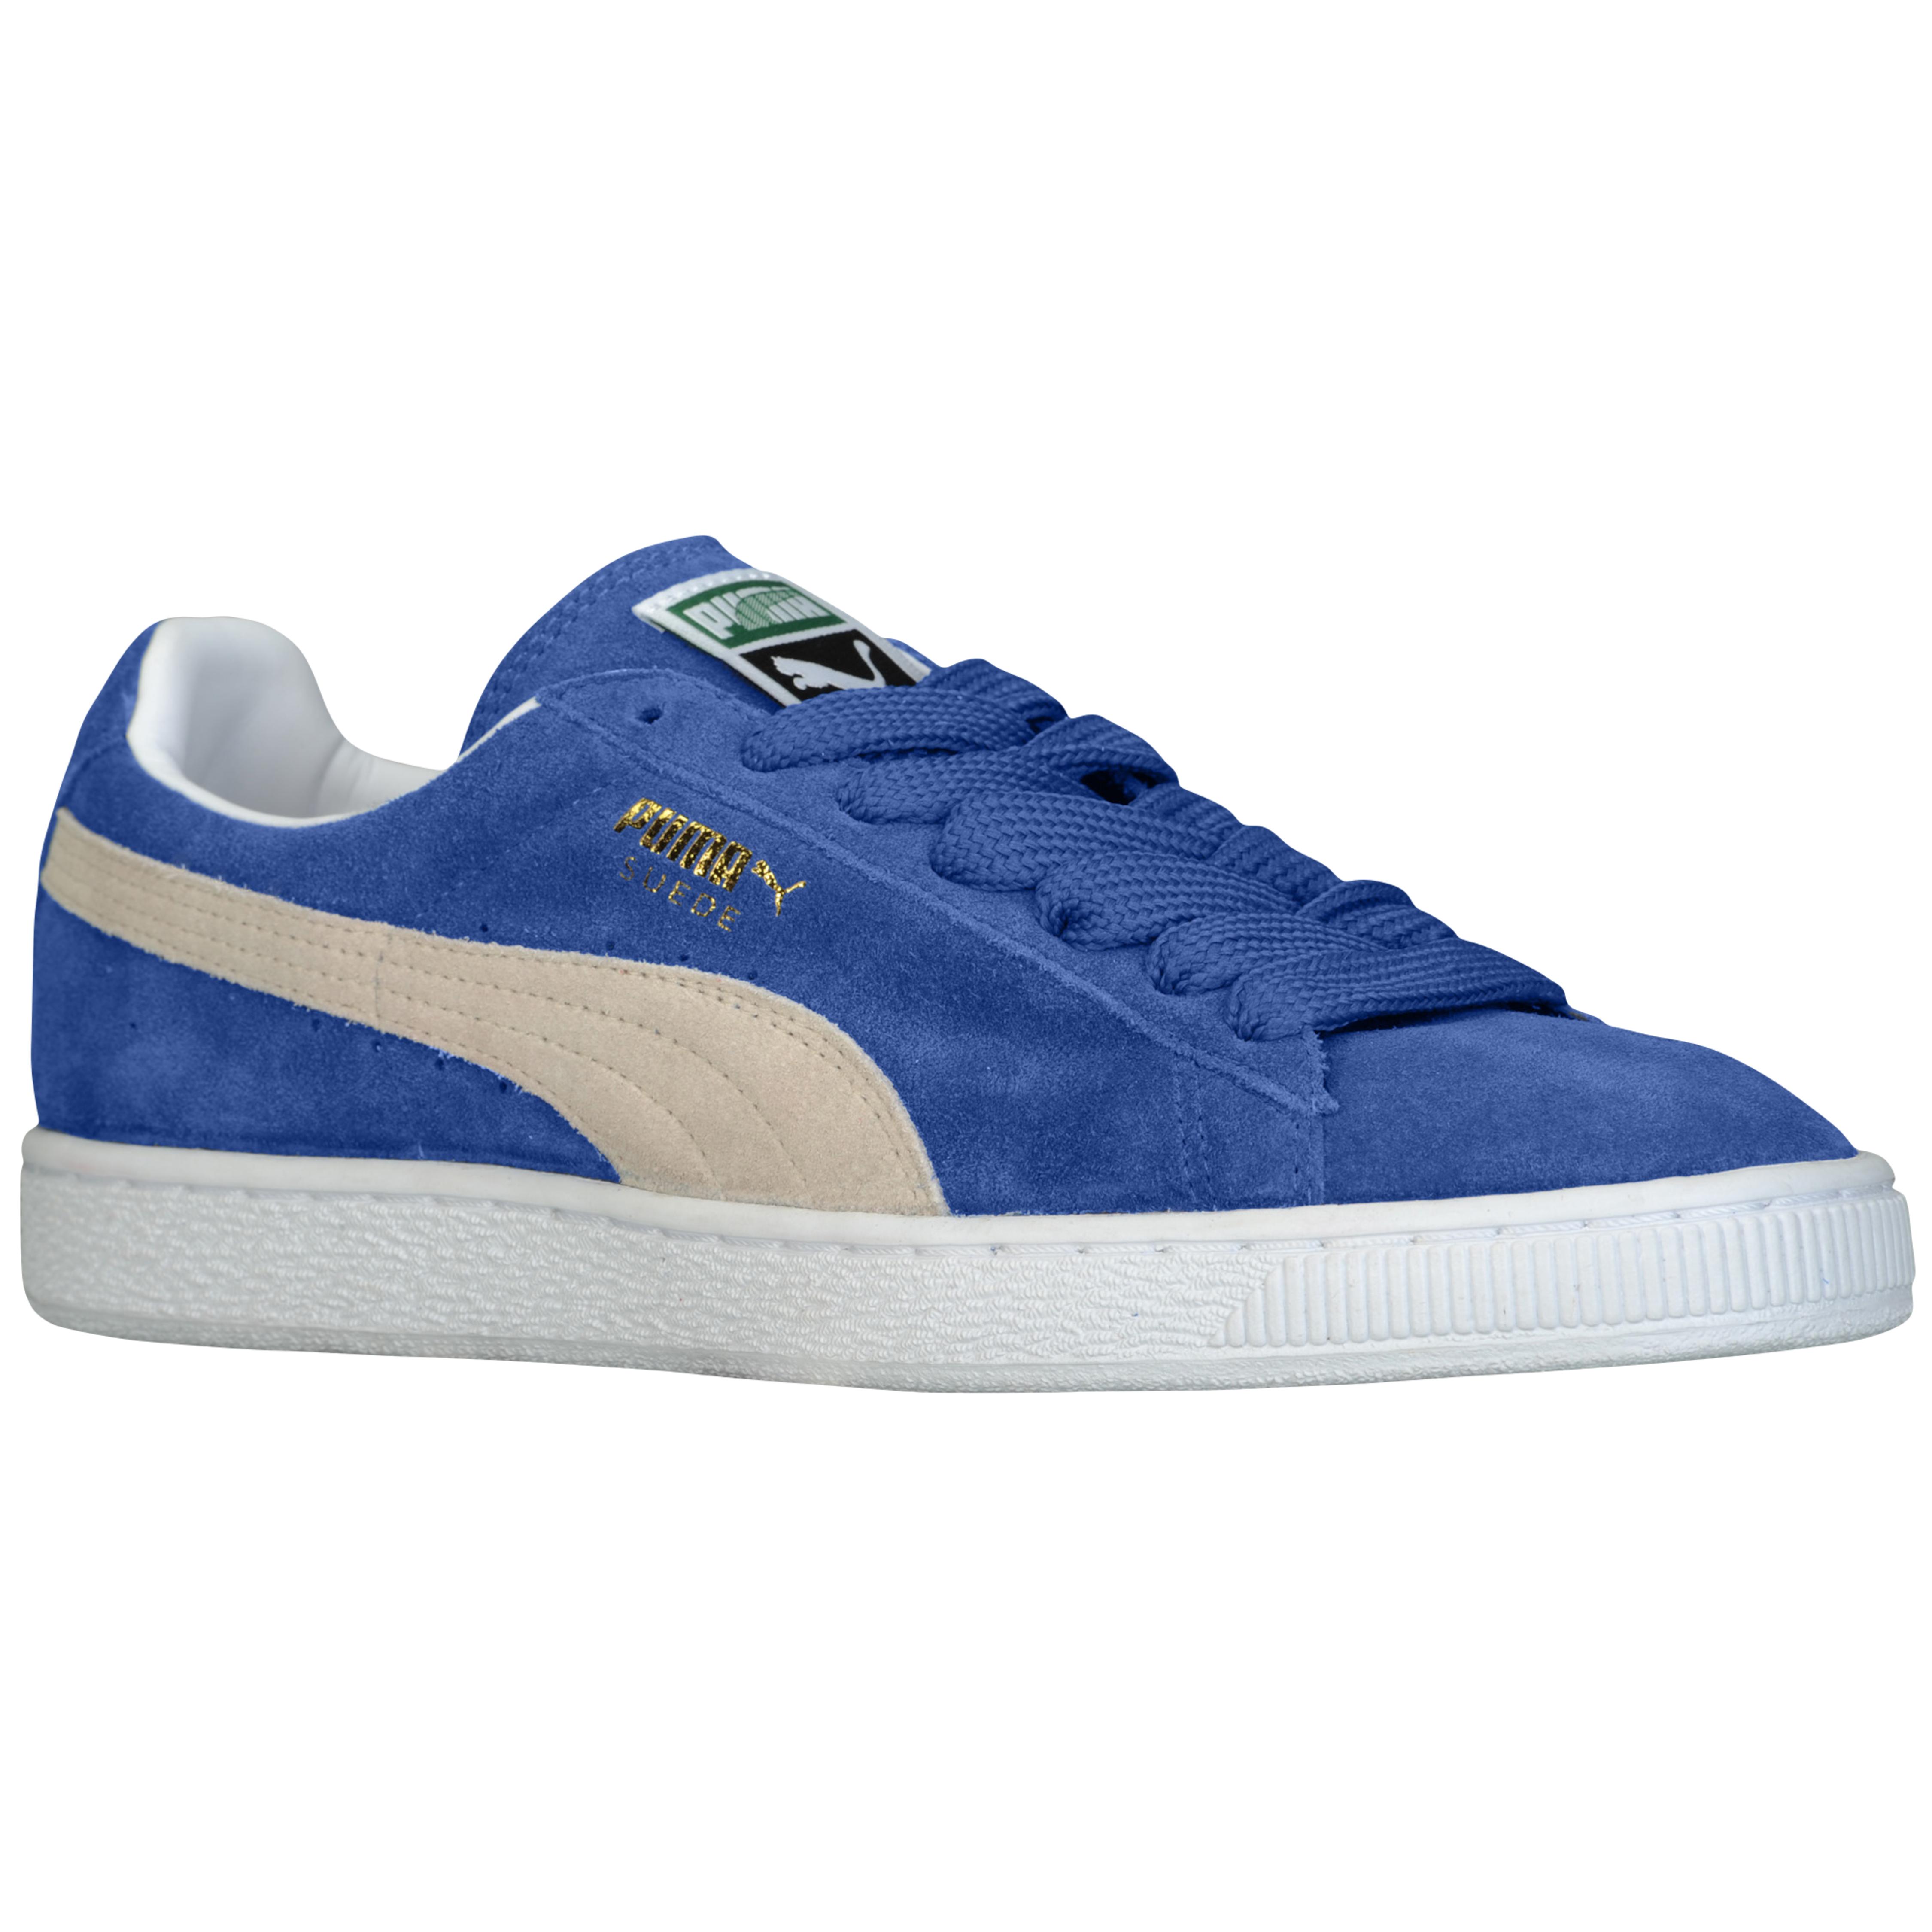 PUMA Suede Classic - Basketball Shoes in Blue for Men - Lyst